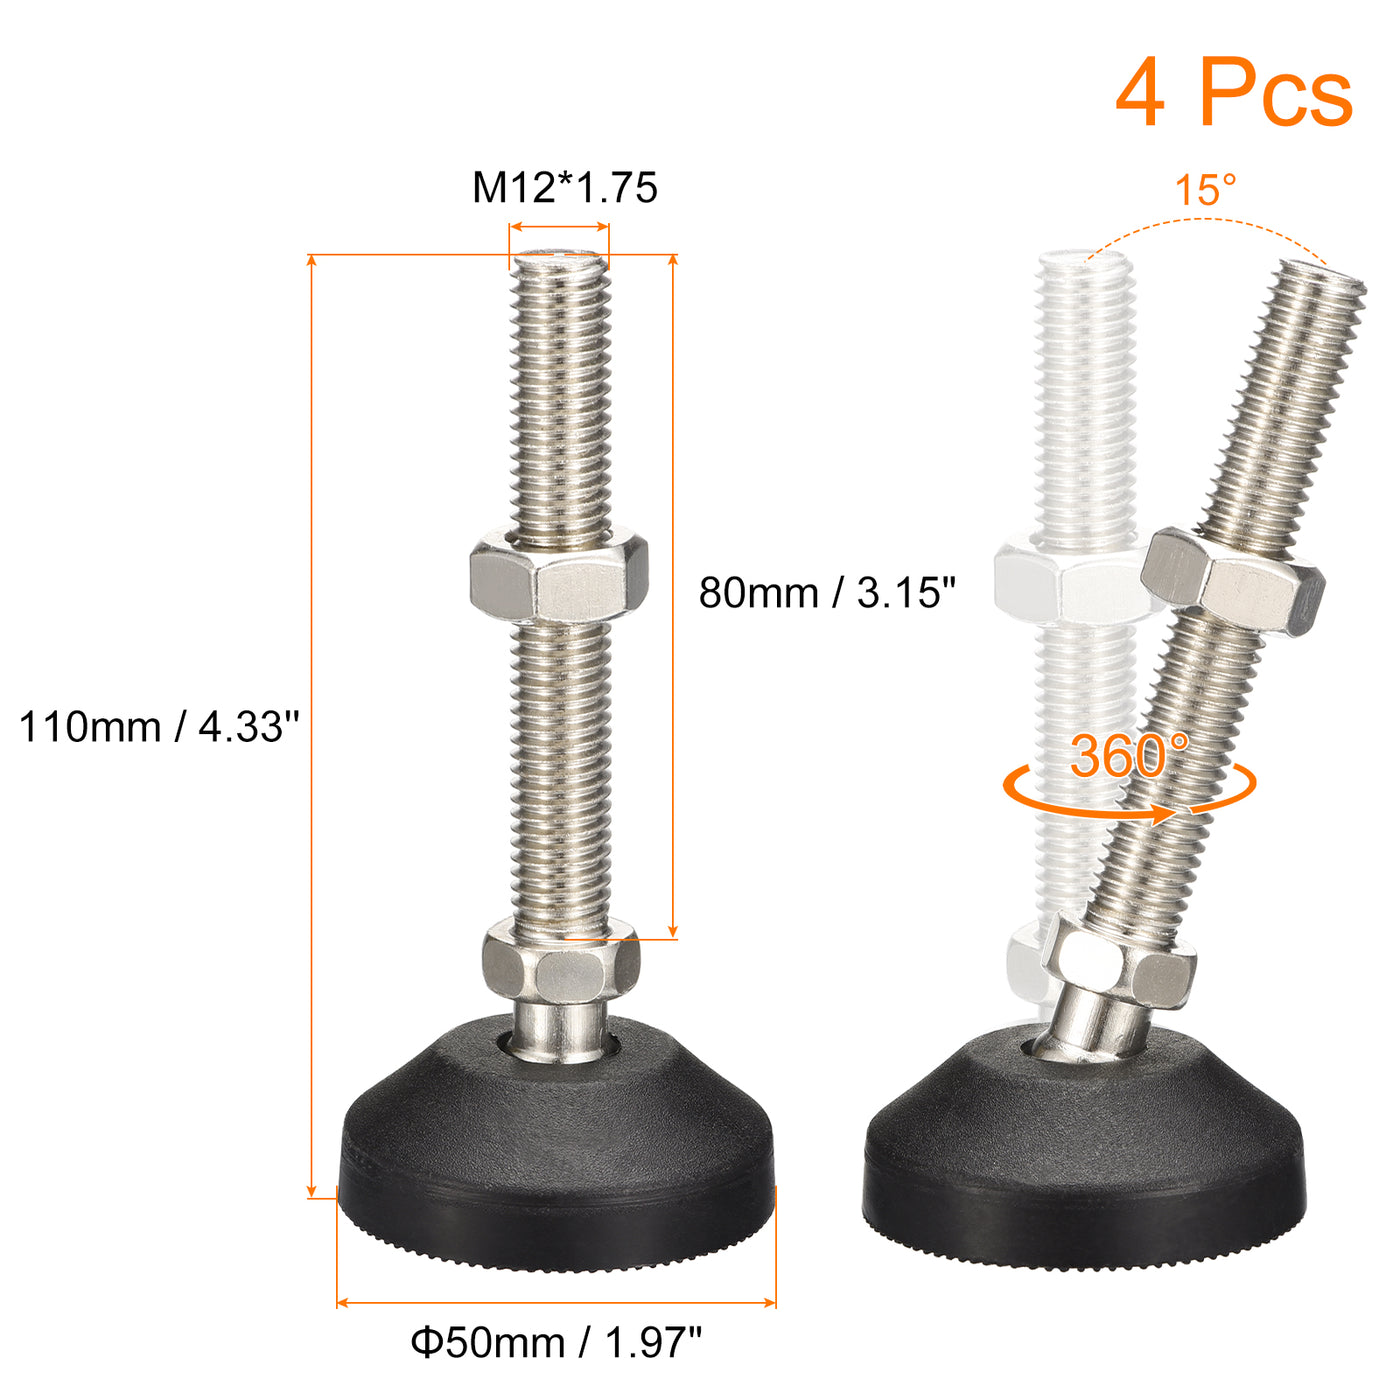 uxcell Uxcell Furniture Levelers, 4Pcs M12x80x50mm Nylon Universal Leveling Feet, Adjustable Swivel Table Feet for Furniture Workshop Machines Machinery Equipment